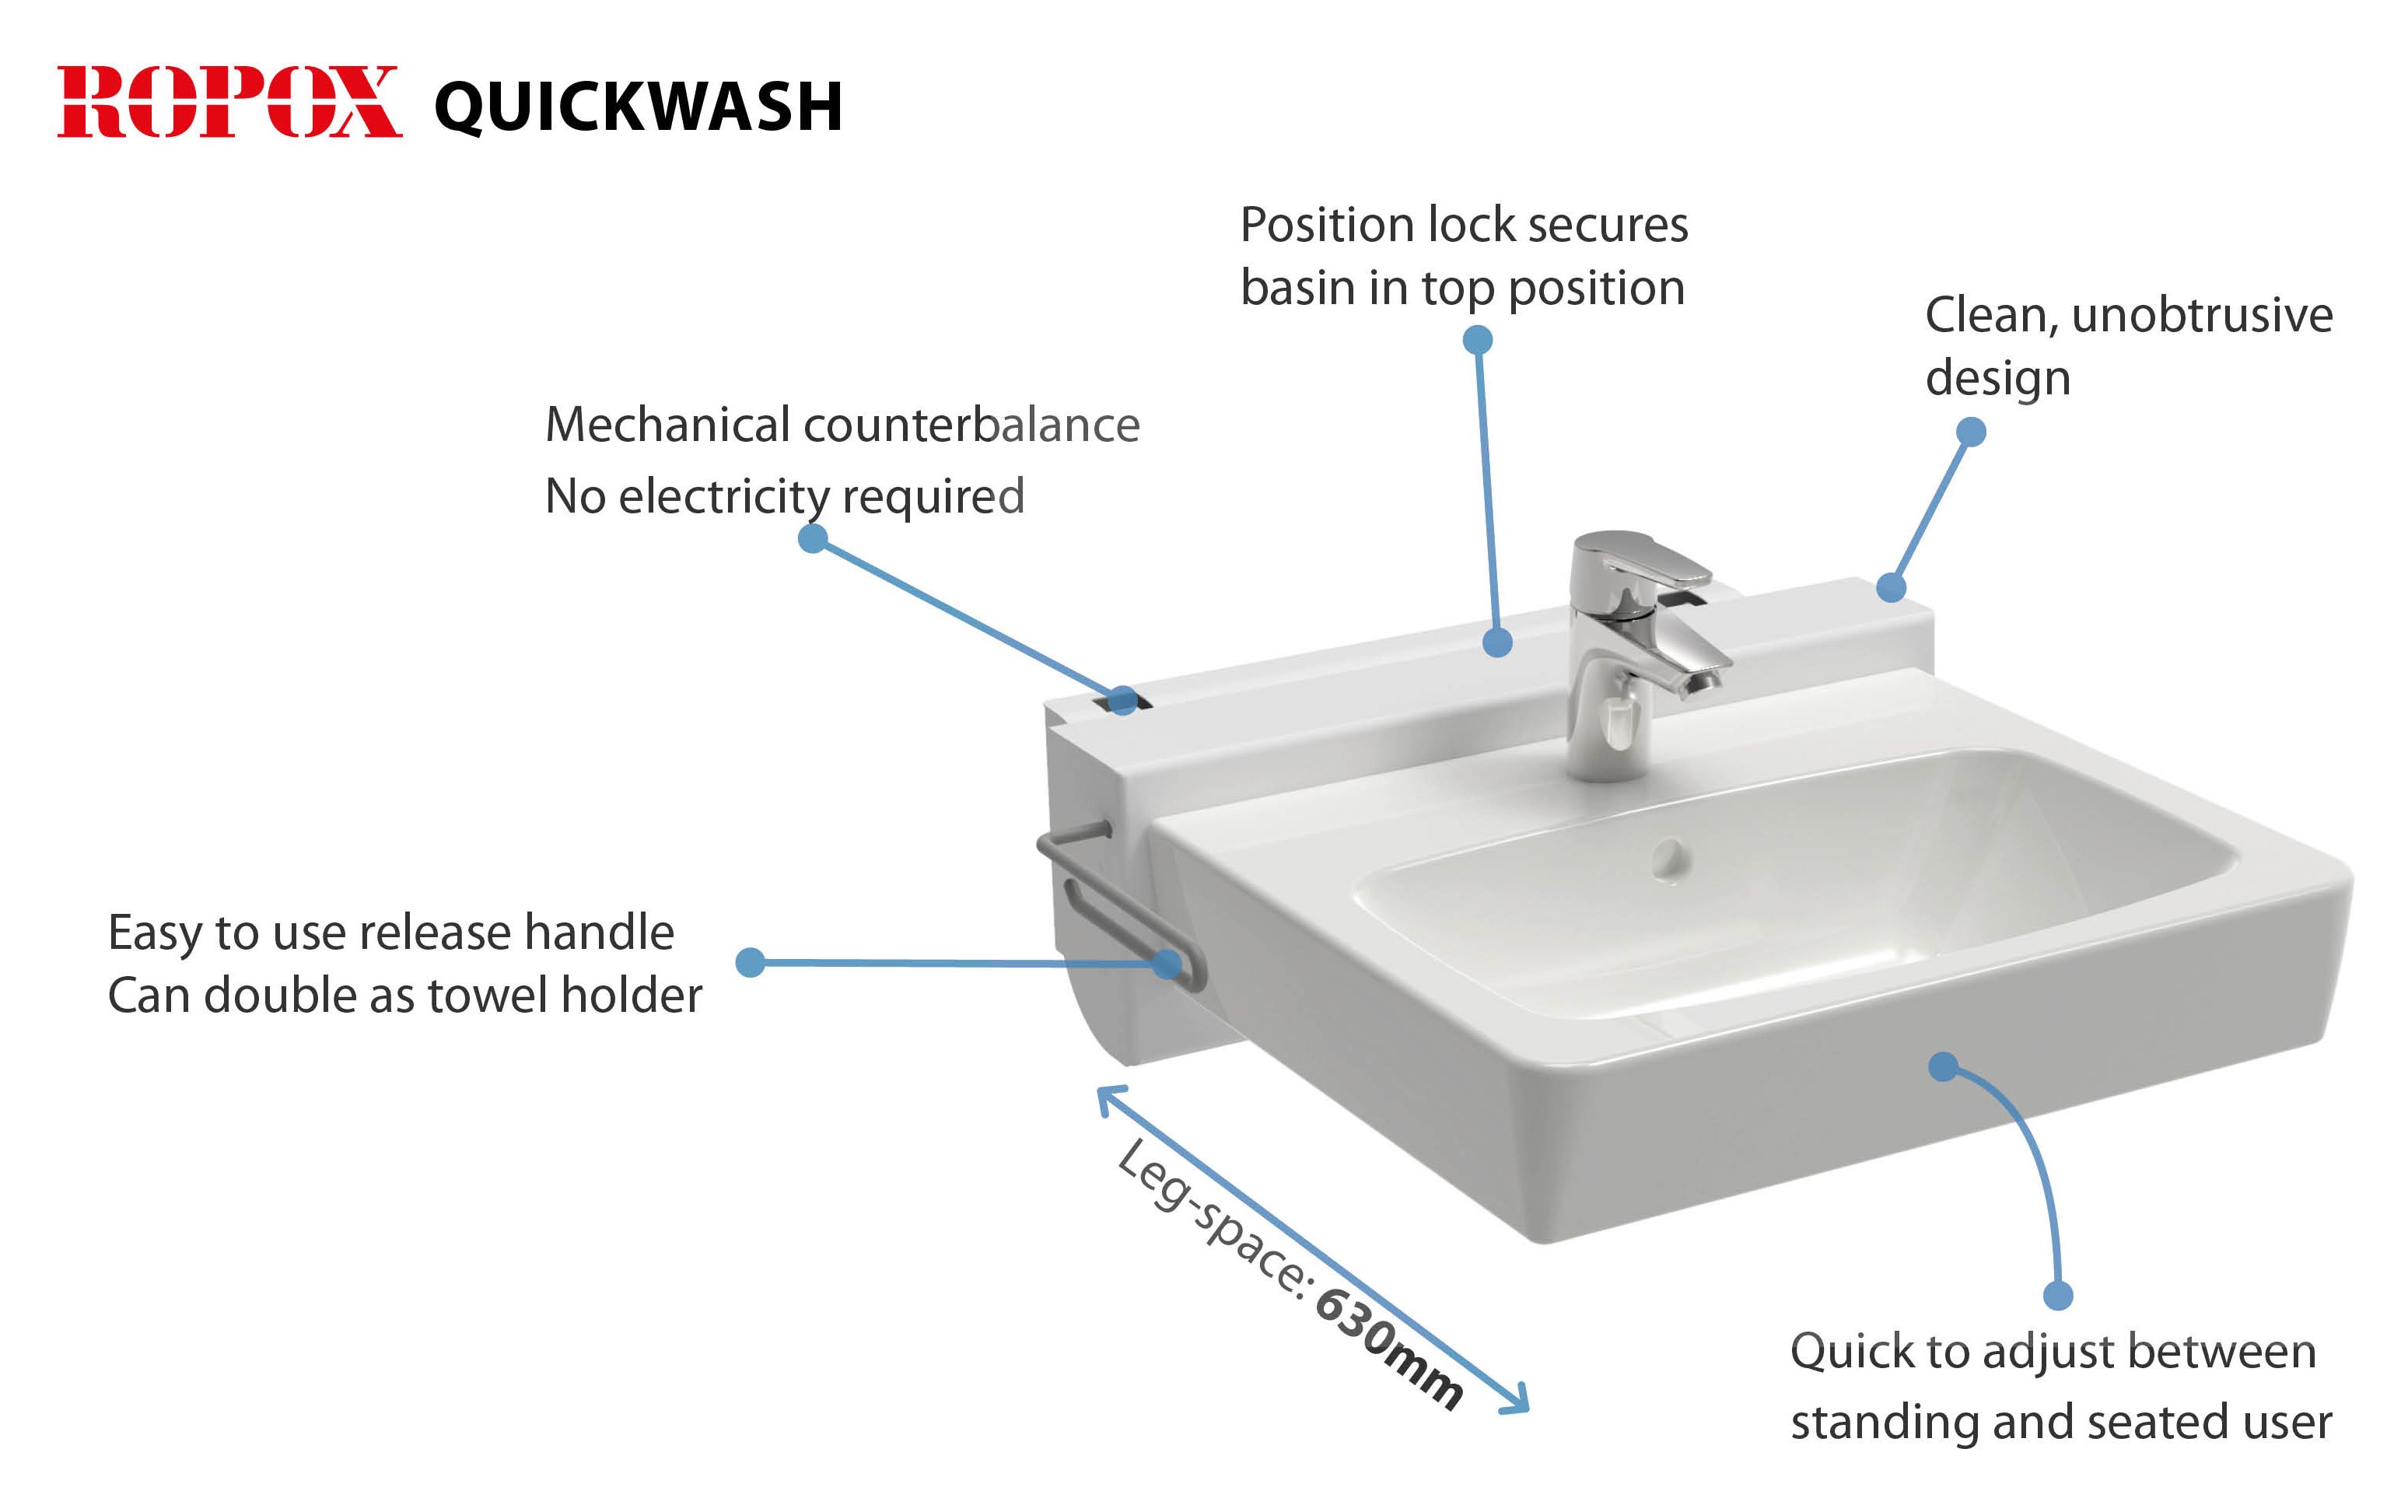 LIFE CHANGING QUICKWASH BASIN FROM ROPOX